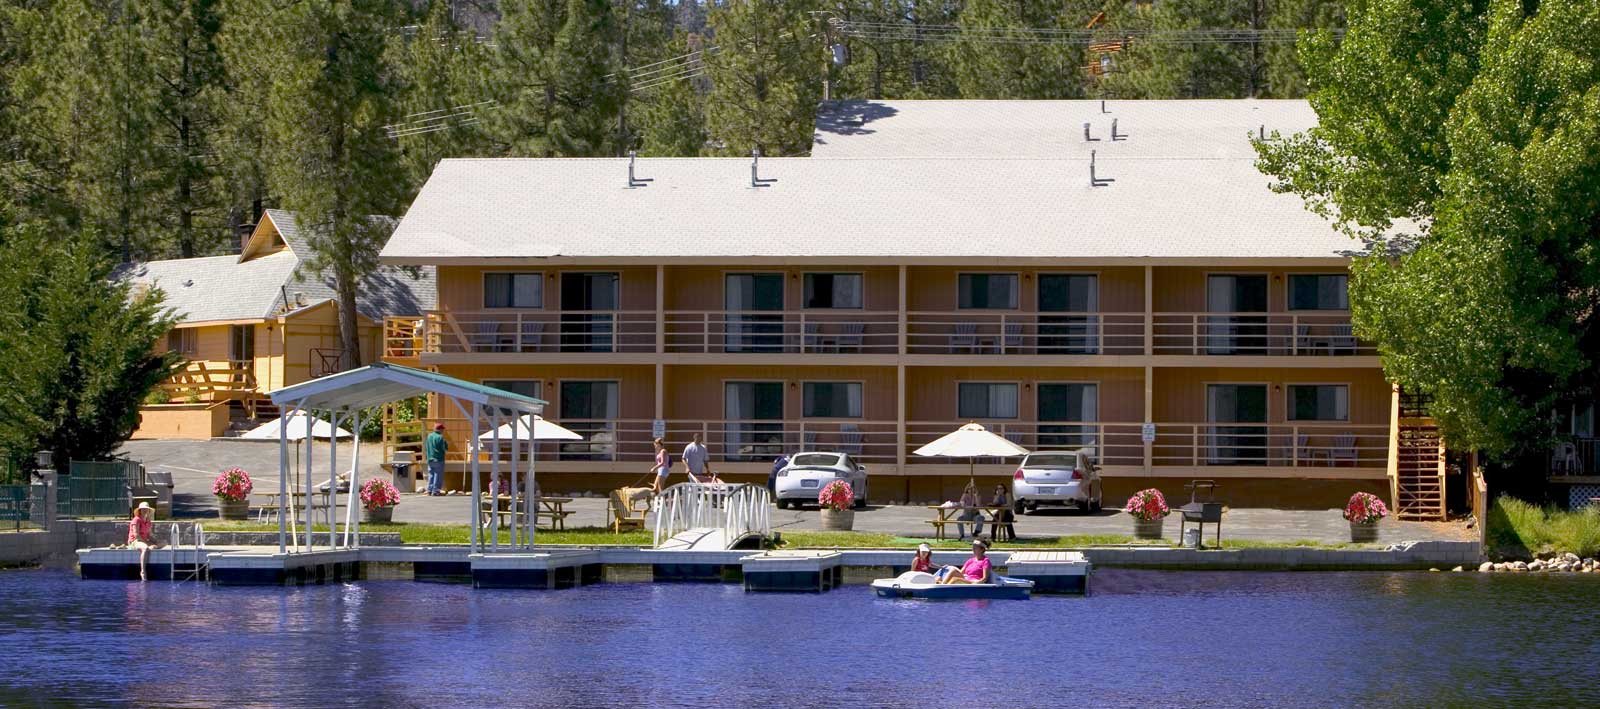 Big Bear Lakefront Lodge from the water